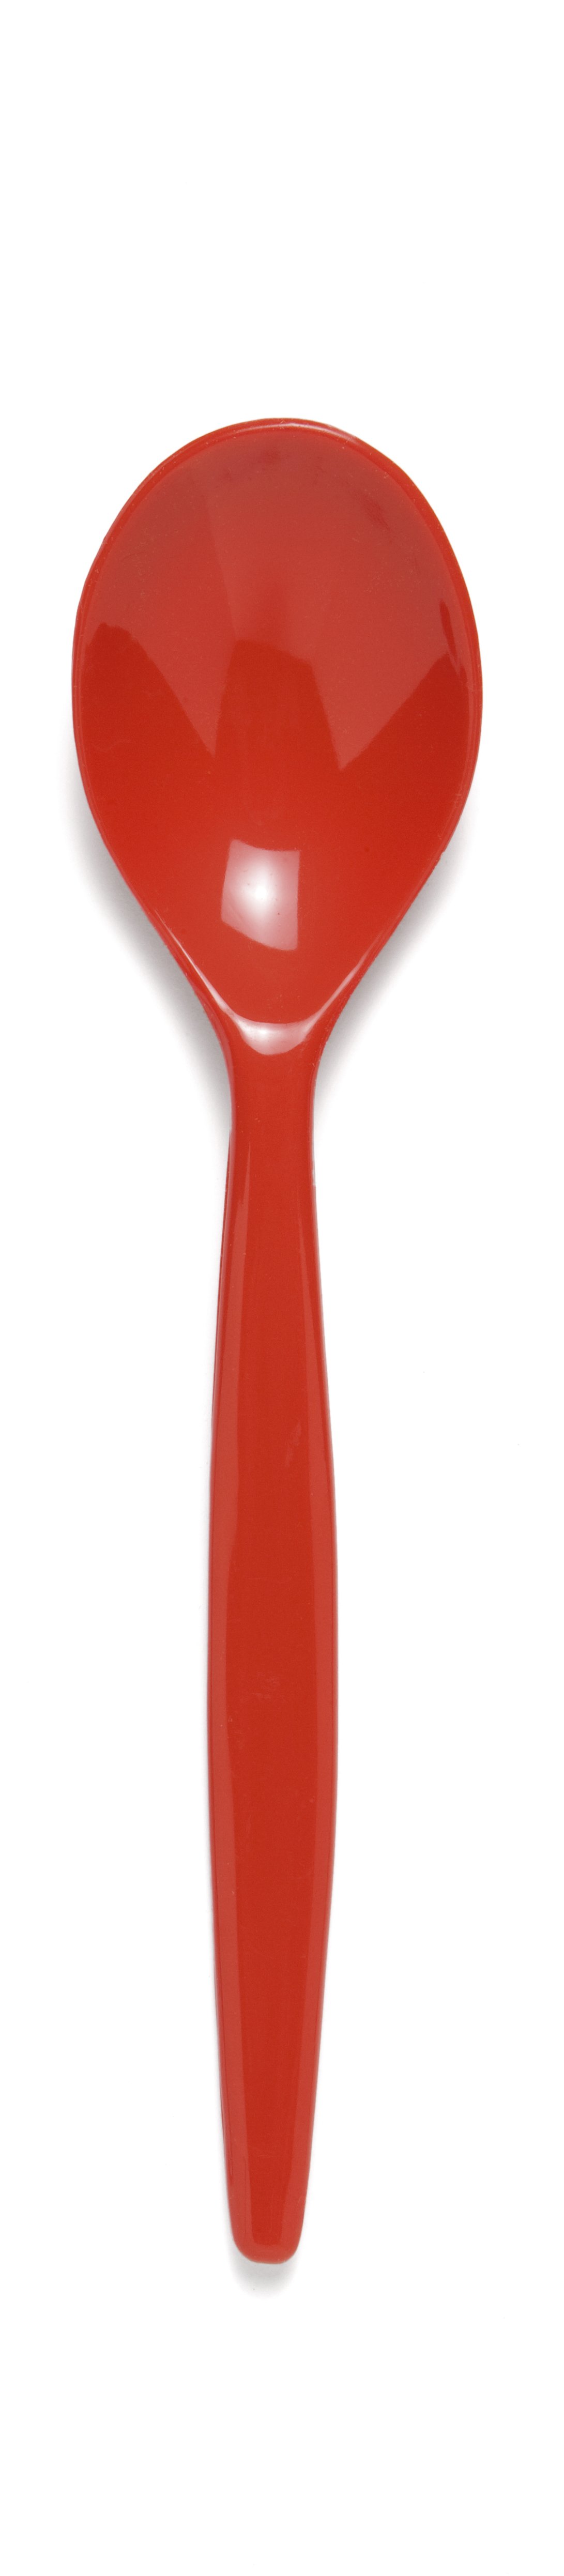 Dessert Spoon Polycarbonate Red